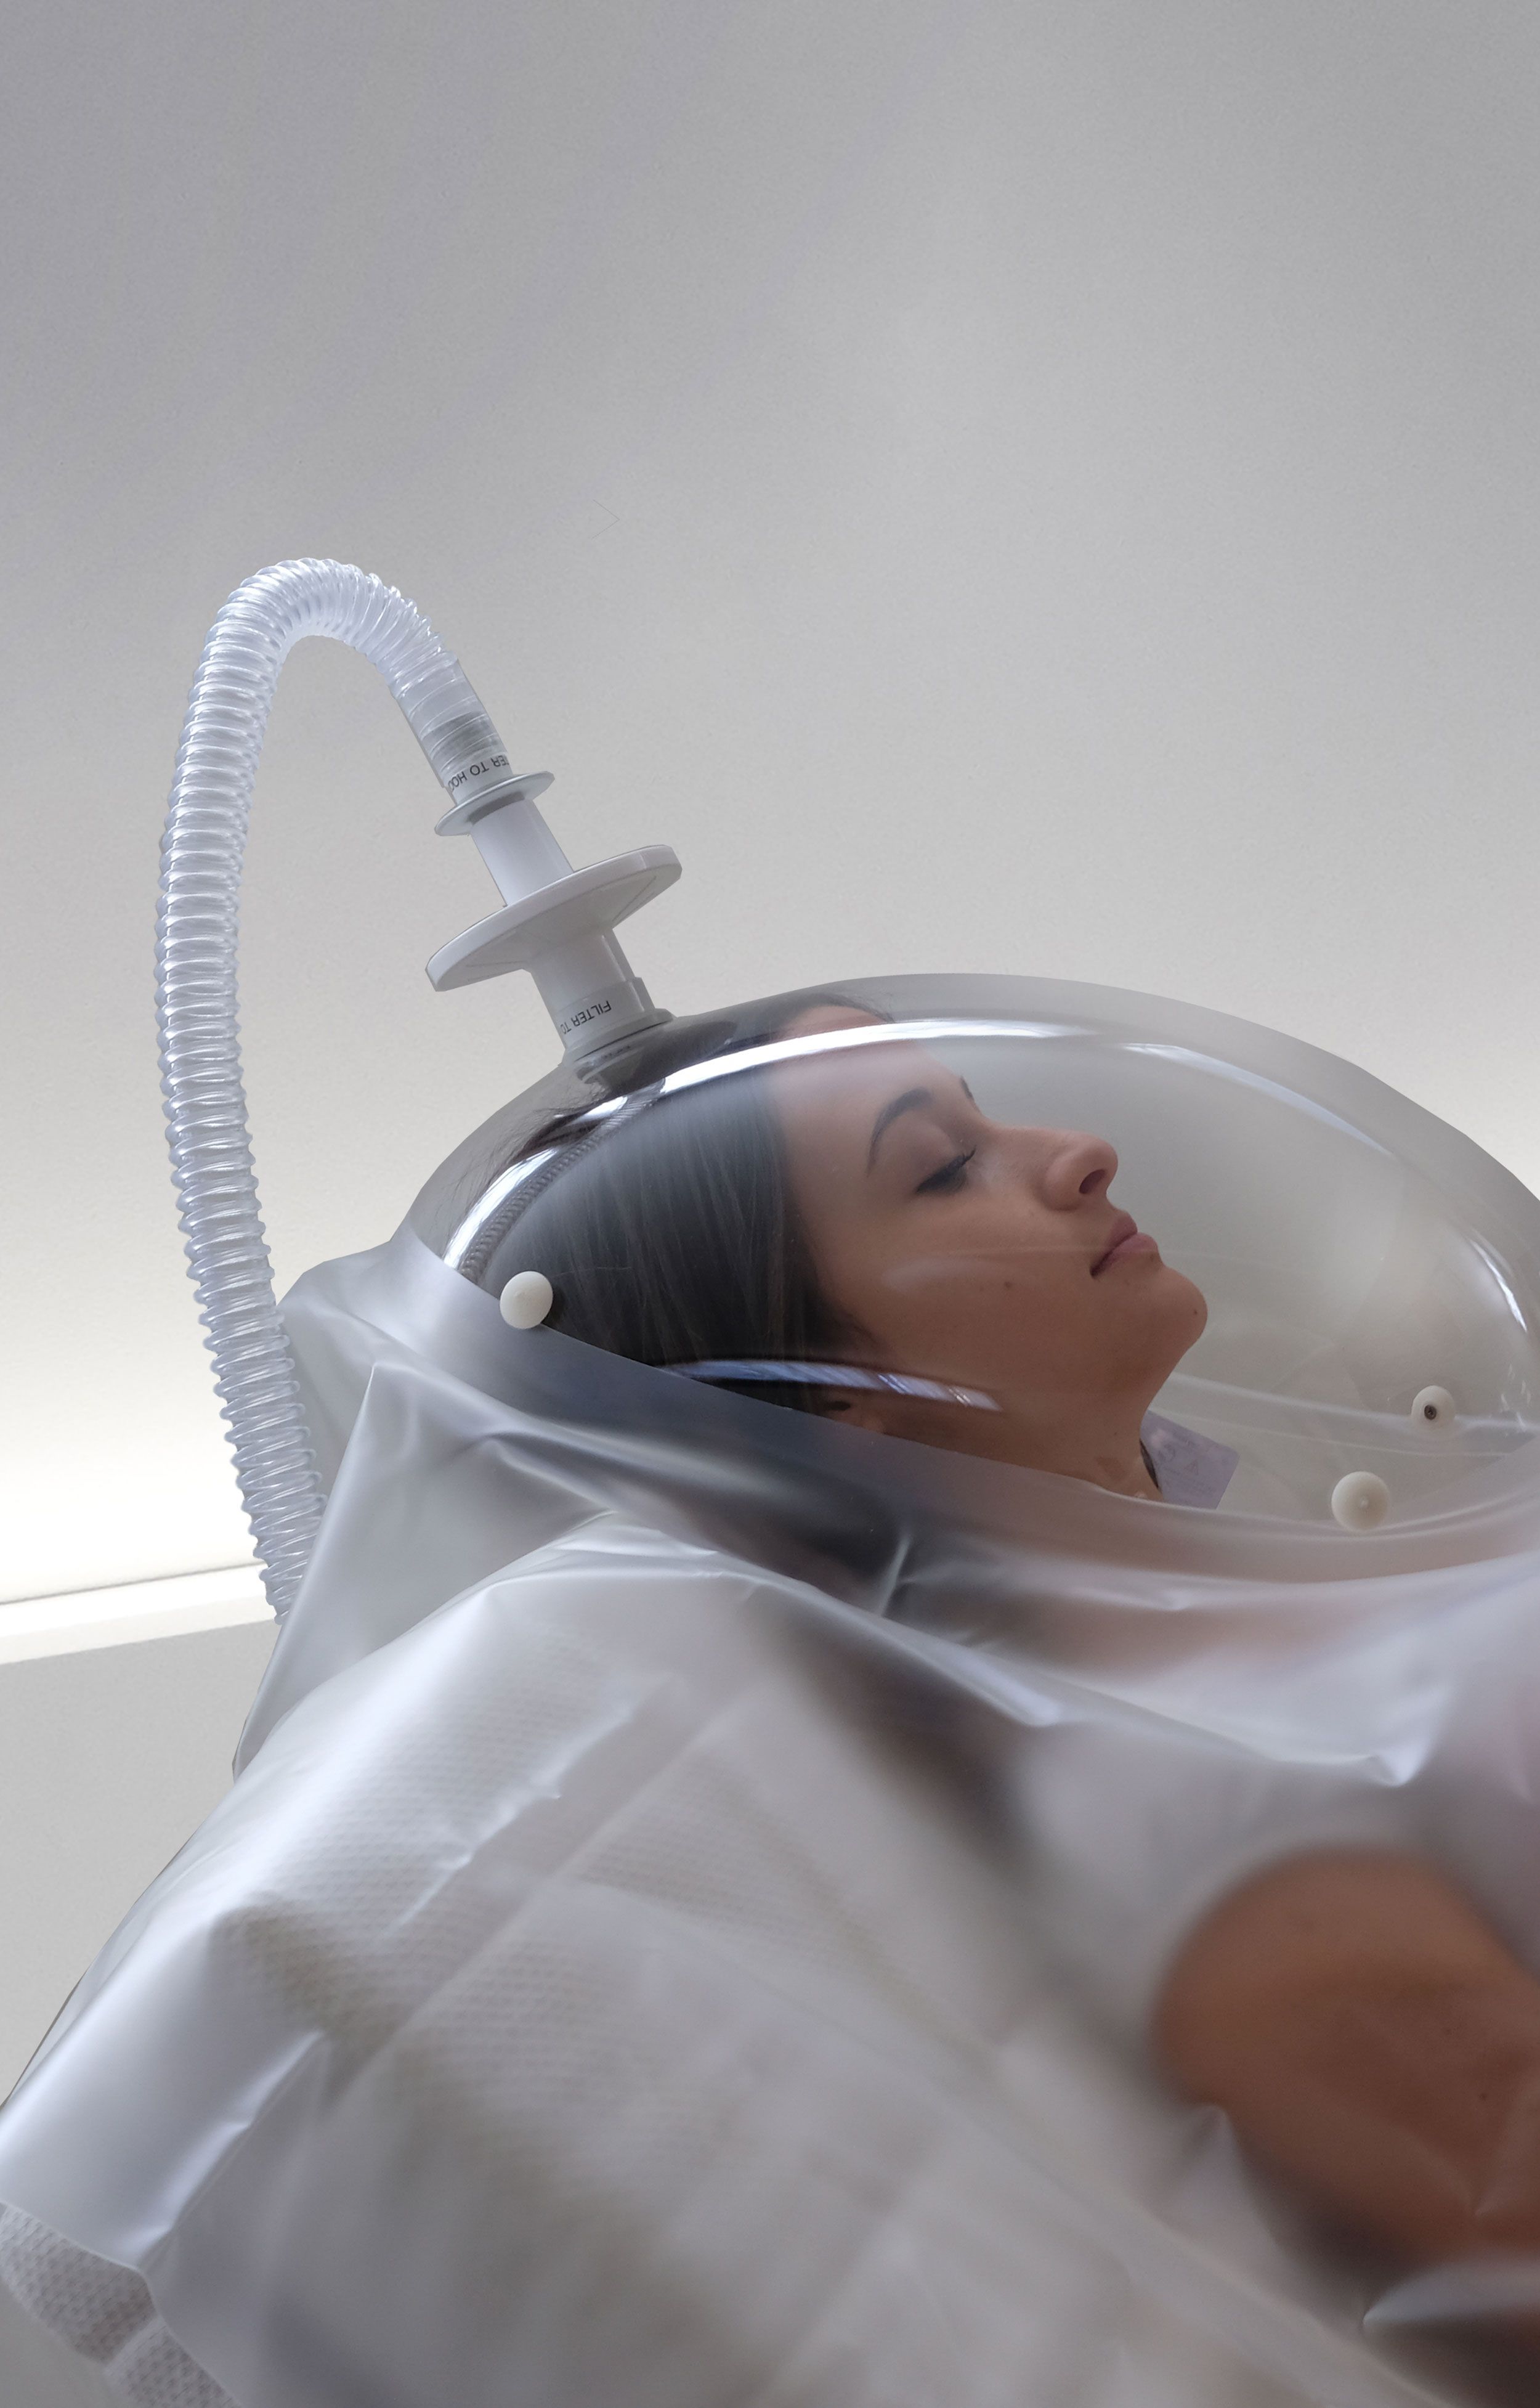 Q-NRG - Woman Resting Energy Expenditure mesurements with canopy hood